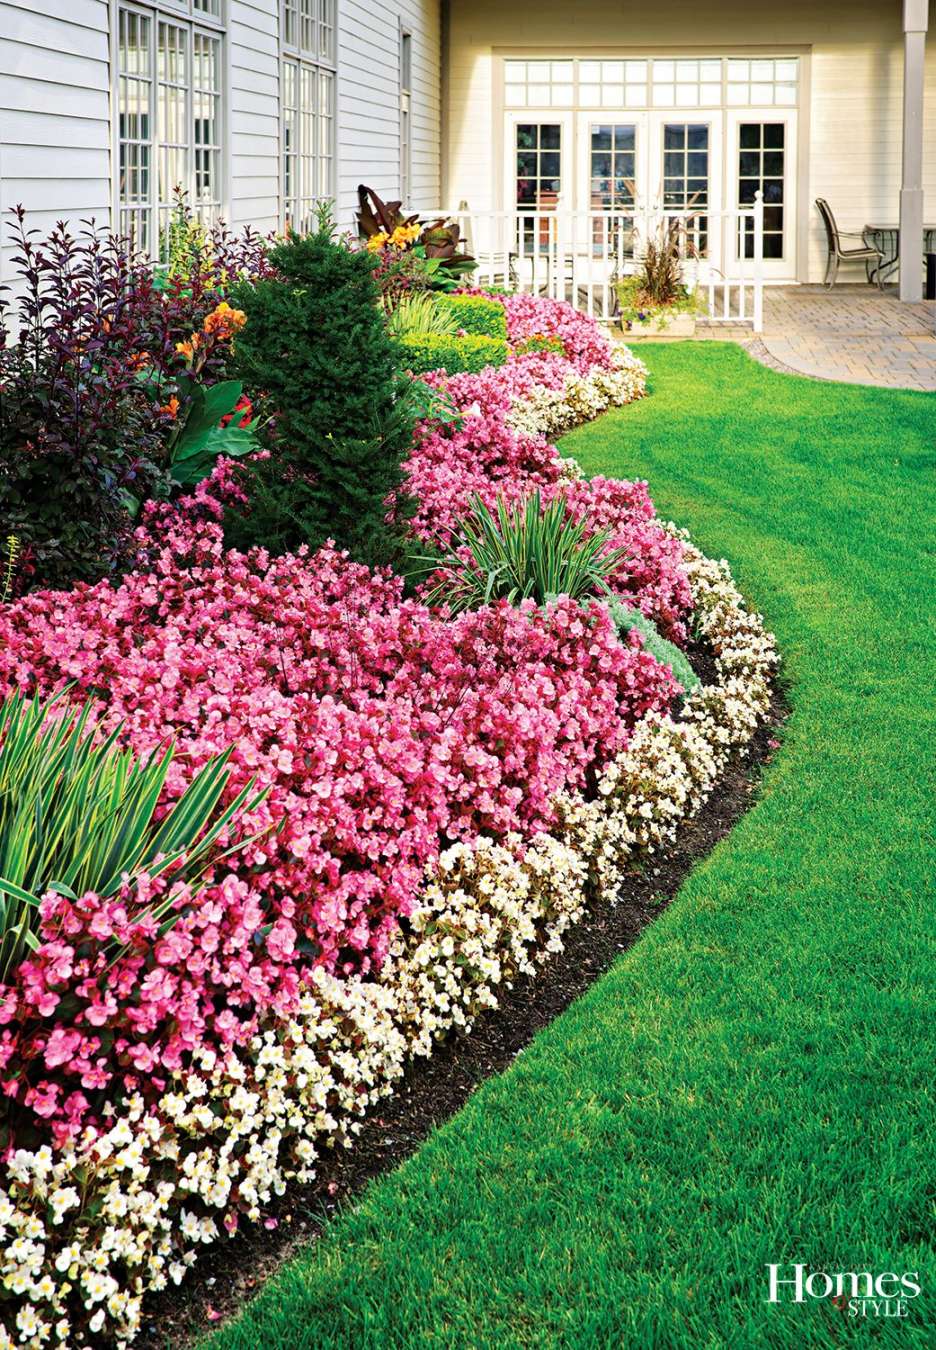 Spring Fever - Kansas City Homes & Style  Front yard landscaping